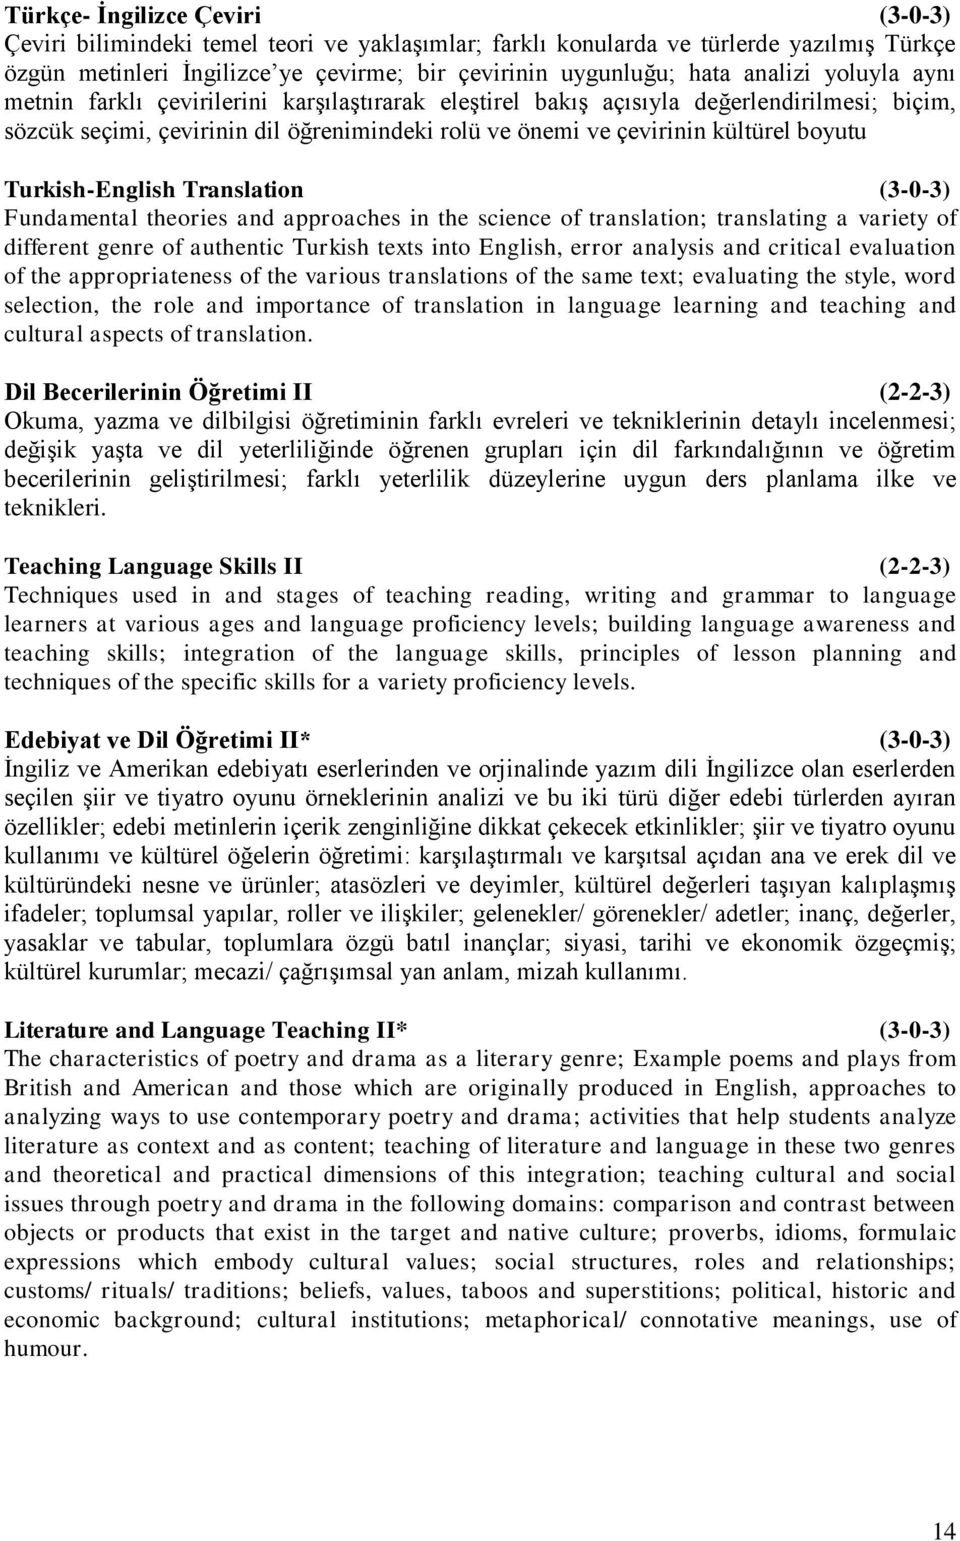 boyutu Turkish-English Translation (3-0-3) Fundamental theories and approaches in the science of translation; translating a variety of different genre of authentic Turkish texts into English, error